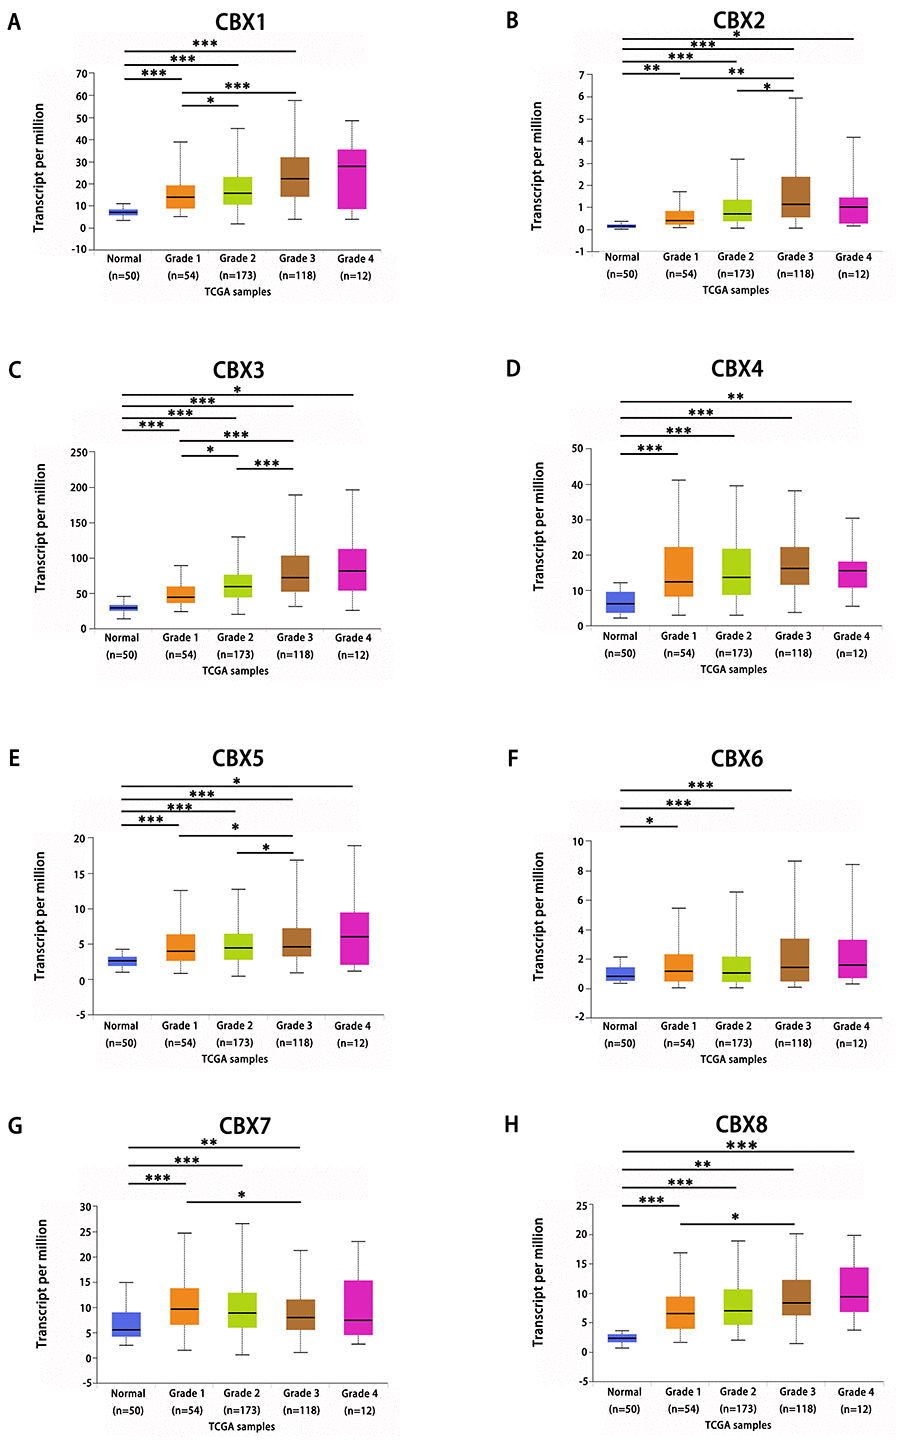 Association of mRNA expression of distinct CBXs family members with tumor grades of HCC patients. mRNA expressions of 8 CBXs family members were significantly related to tumor grades, and as tumor grade increased, the mRAN expressions of CBXs tended to be higher. The highest mRNA expressions of CBX1/3/4/5/6/8 were found in tumor grade 4 (A, C-F, H), while the highest mRNA expression of CBX2 was found in grade 3 (B). However, the highest mRNA expression of CBX7 was found in grade 1, and as tumor grade increased, the mRAN expression of CBX7 tended to be lower (G). *ppp